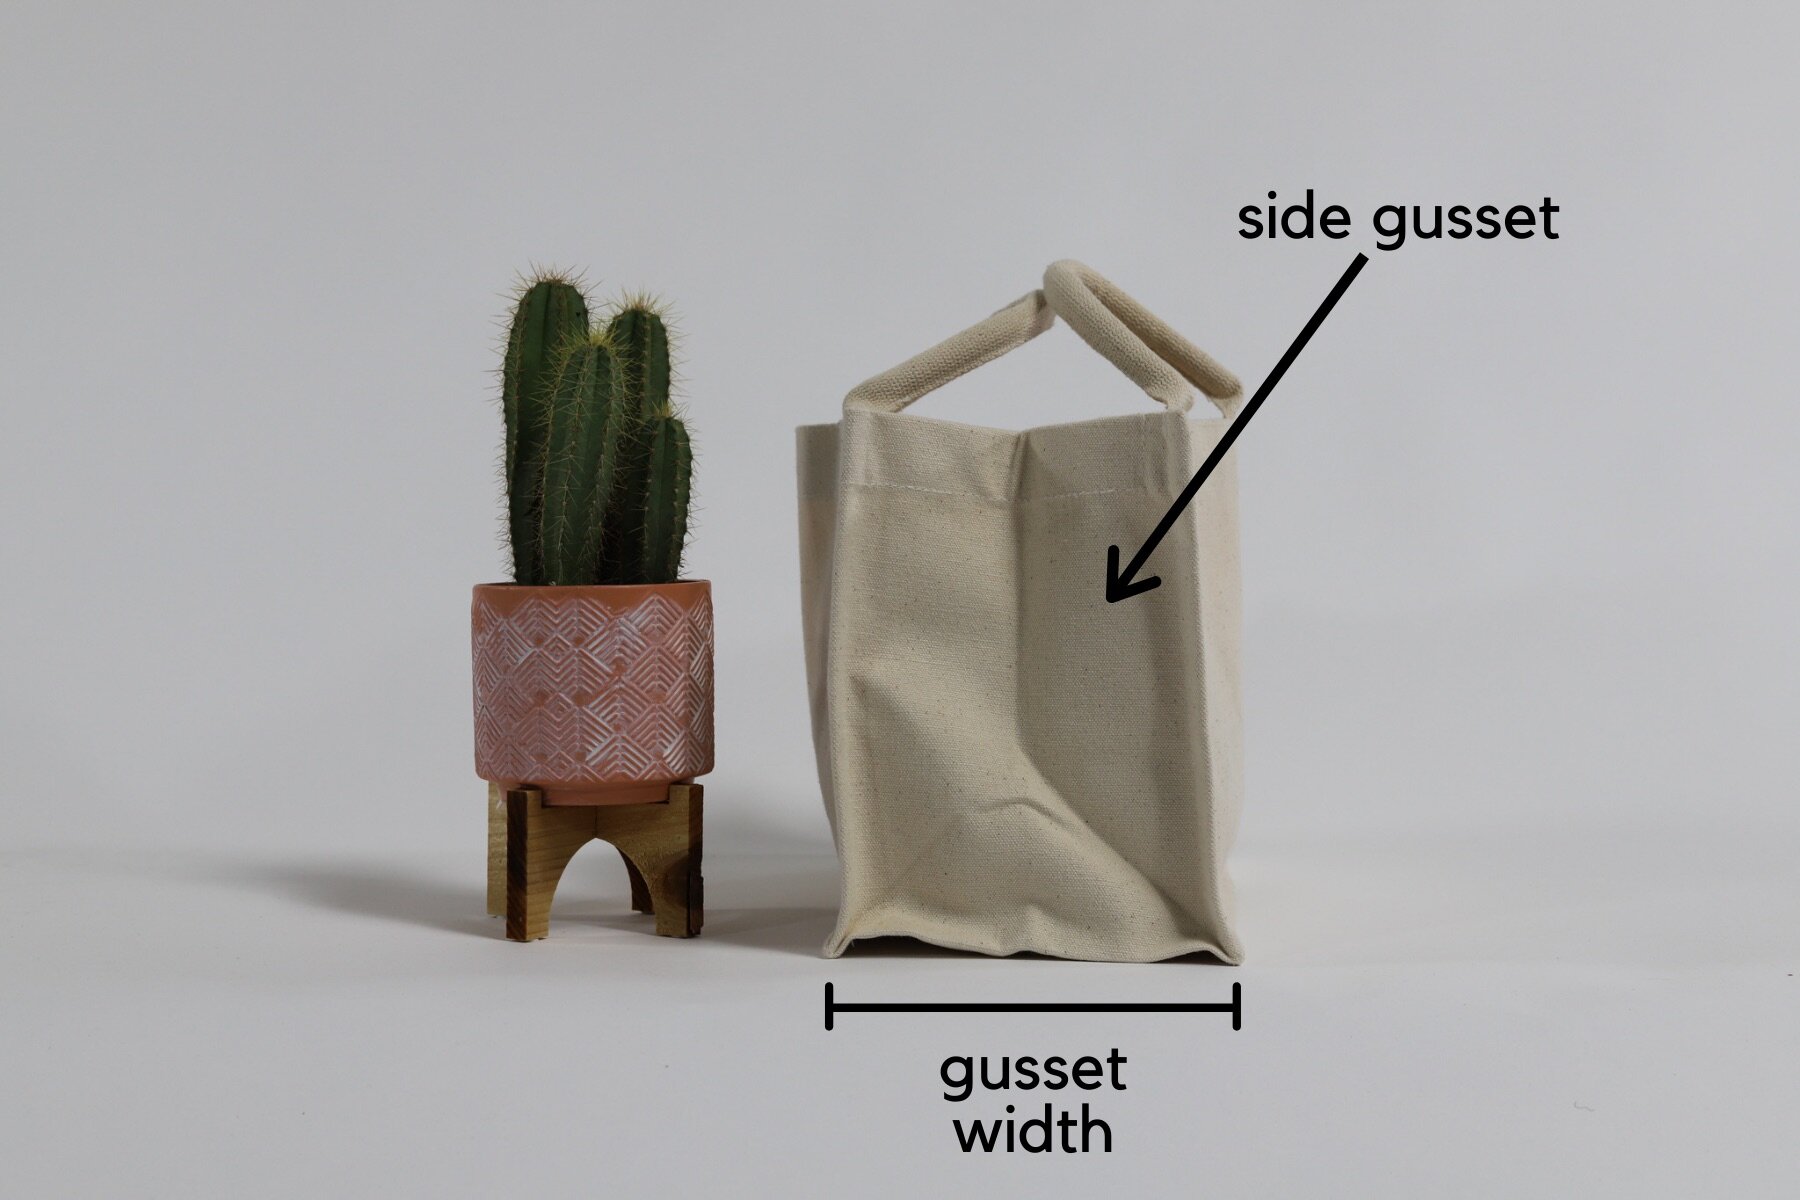 What is the purpose of a gusset? What are the gussets in the bag?